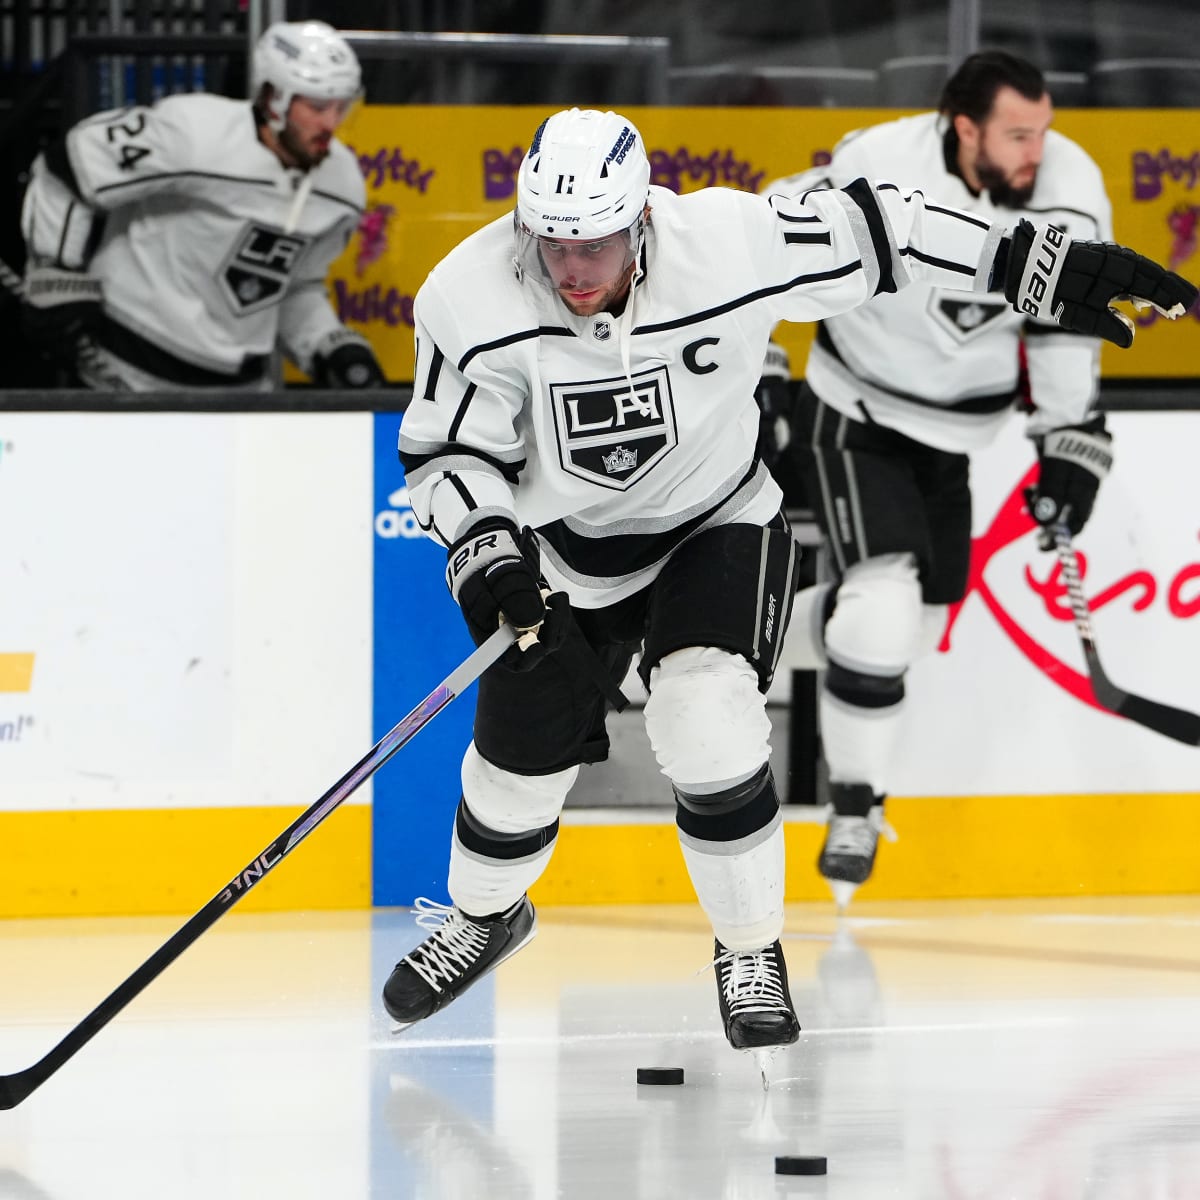 Frozen Royalty Video: LA Kings Luc Robitaille Talks About His New